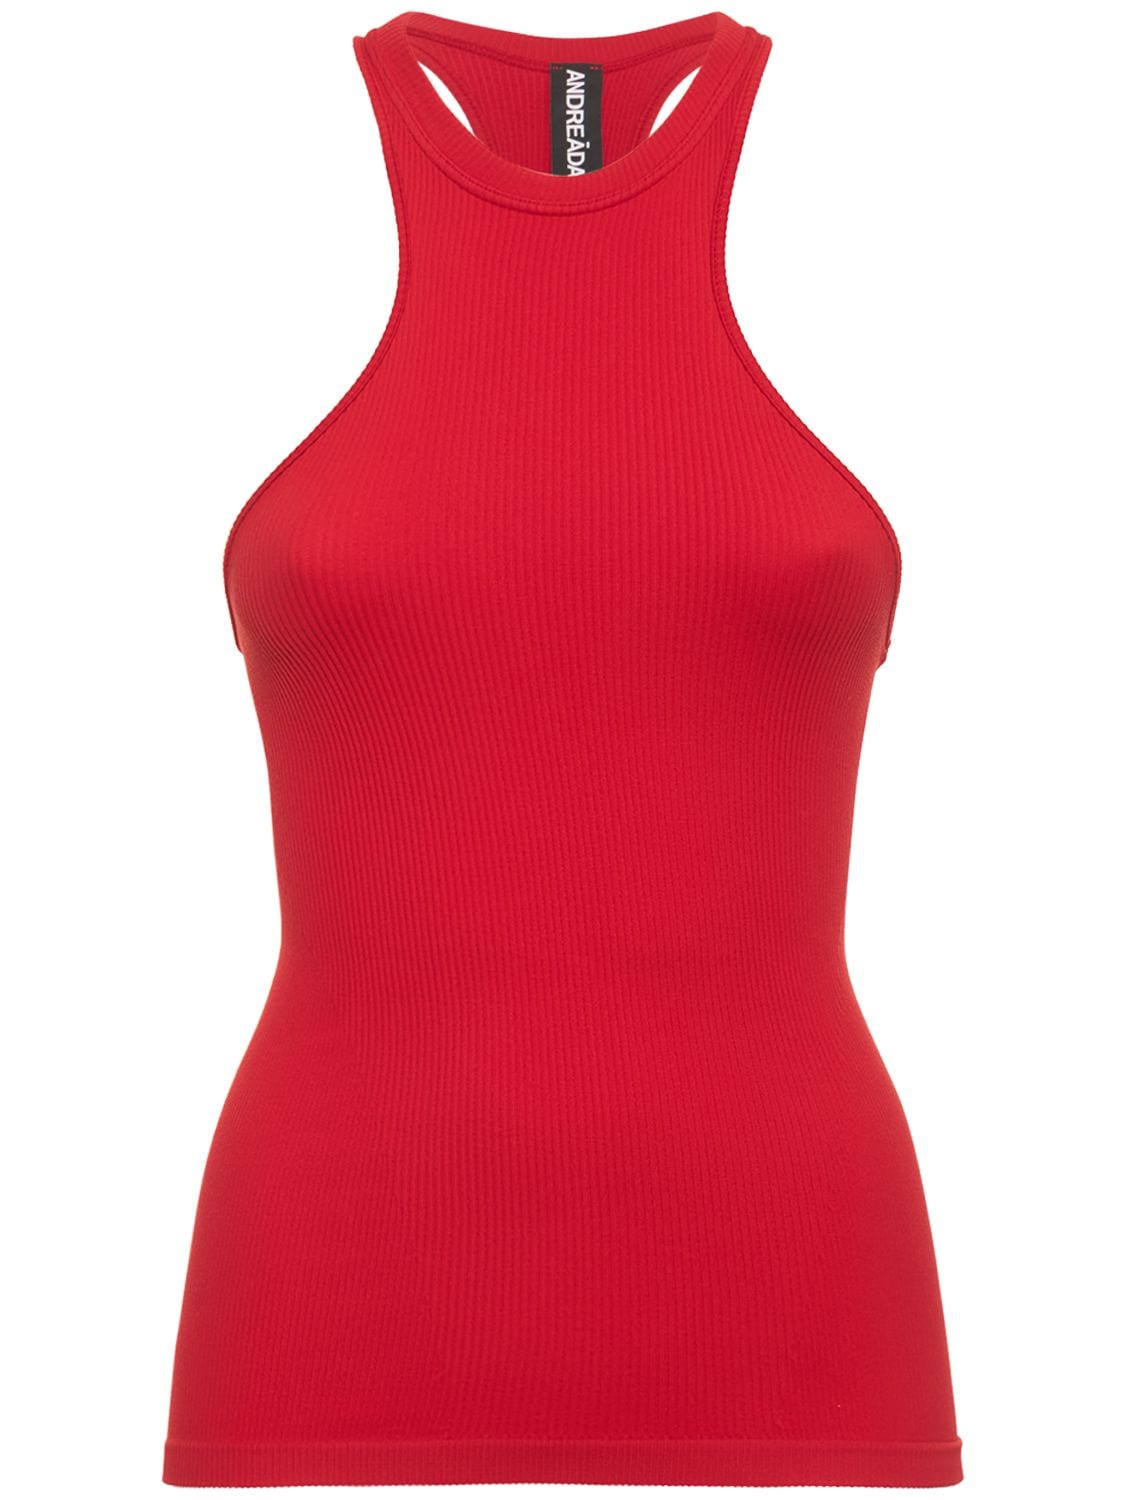 ANDREADAMO Ribbed Knit Stretch Jersey Top